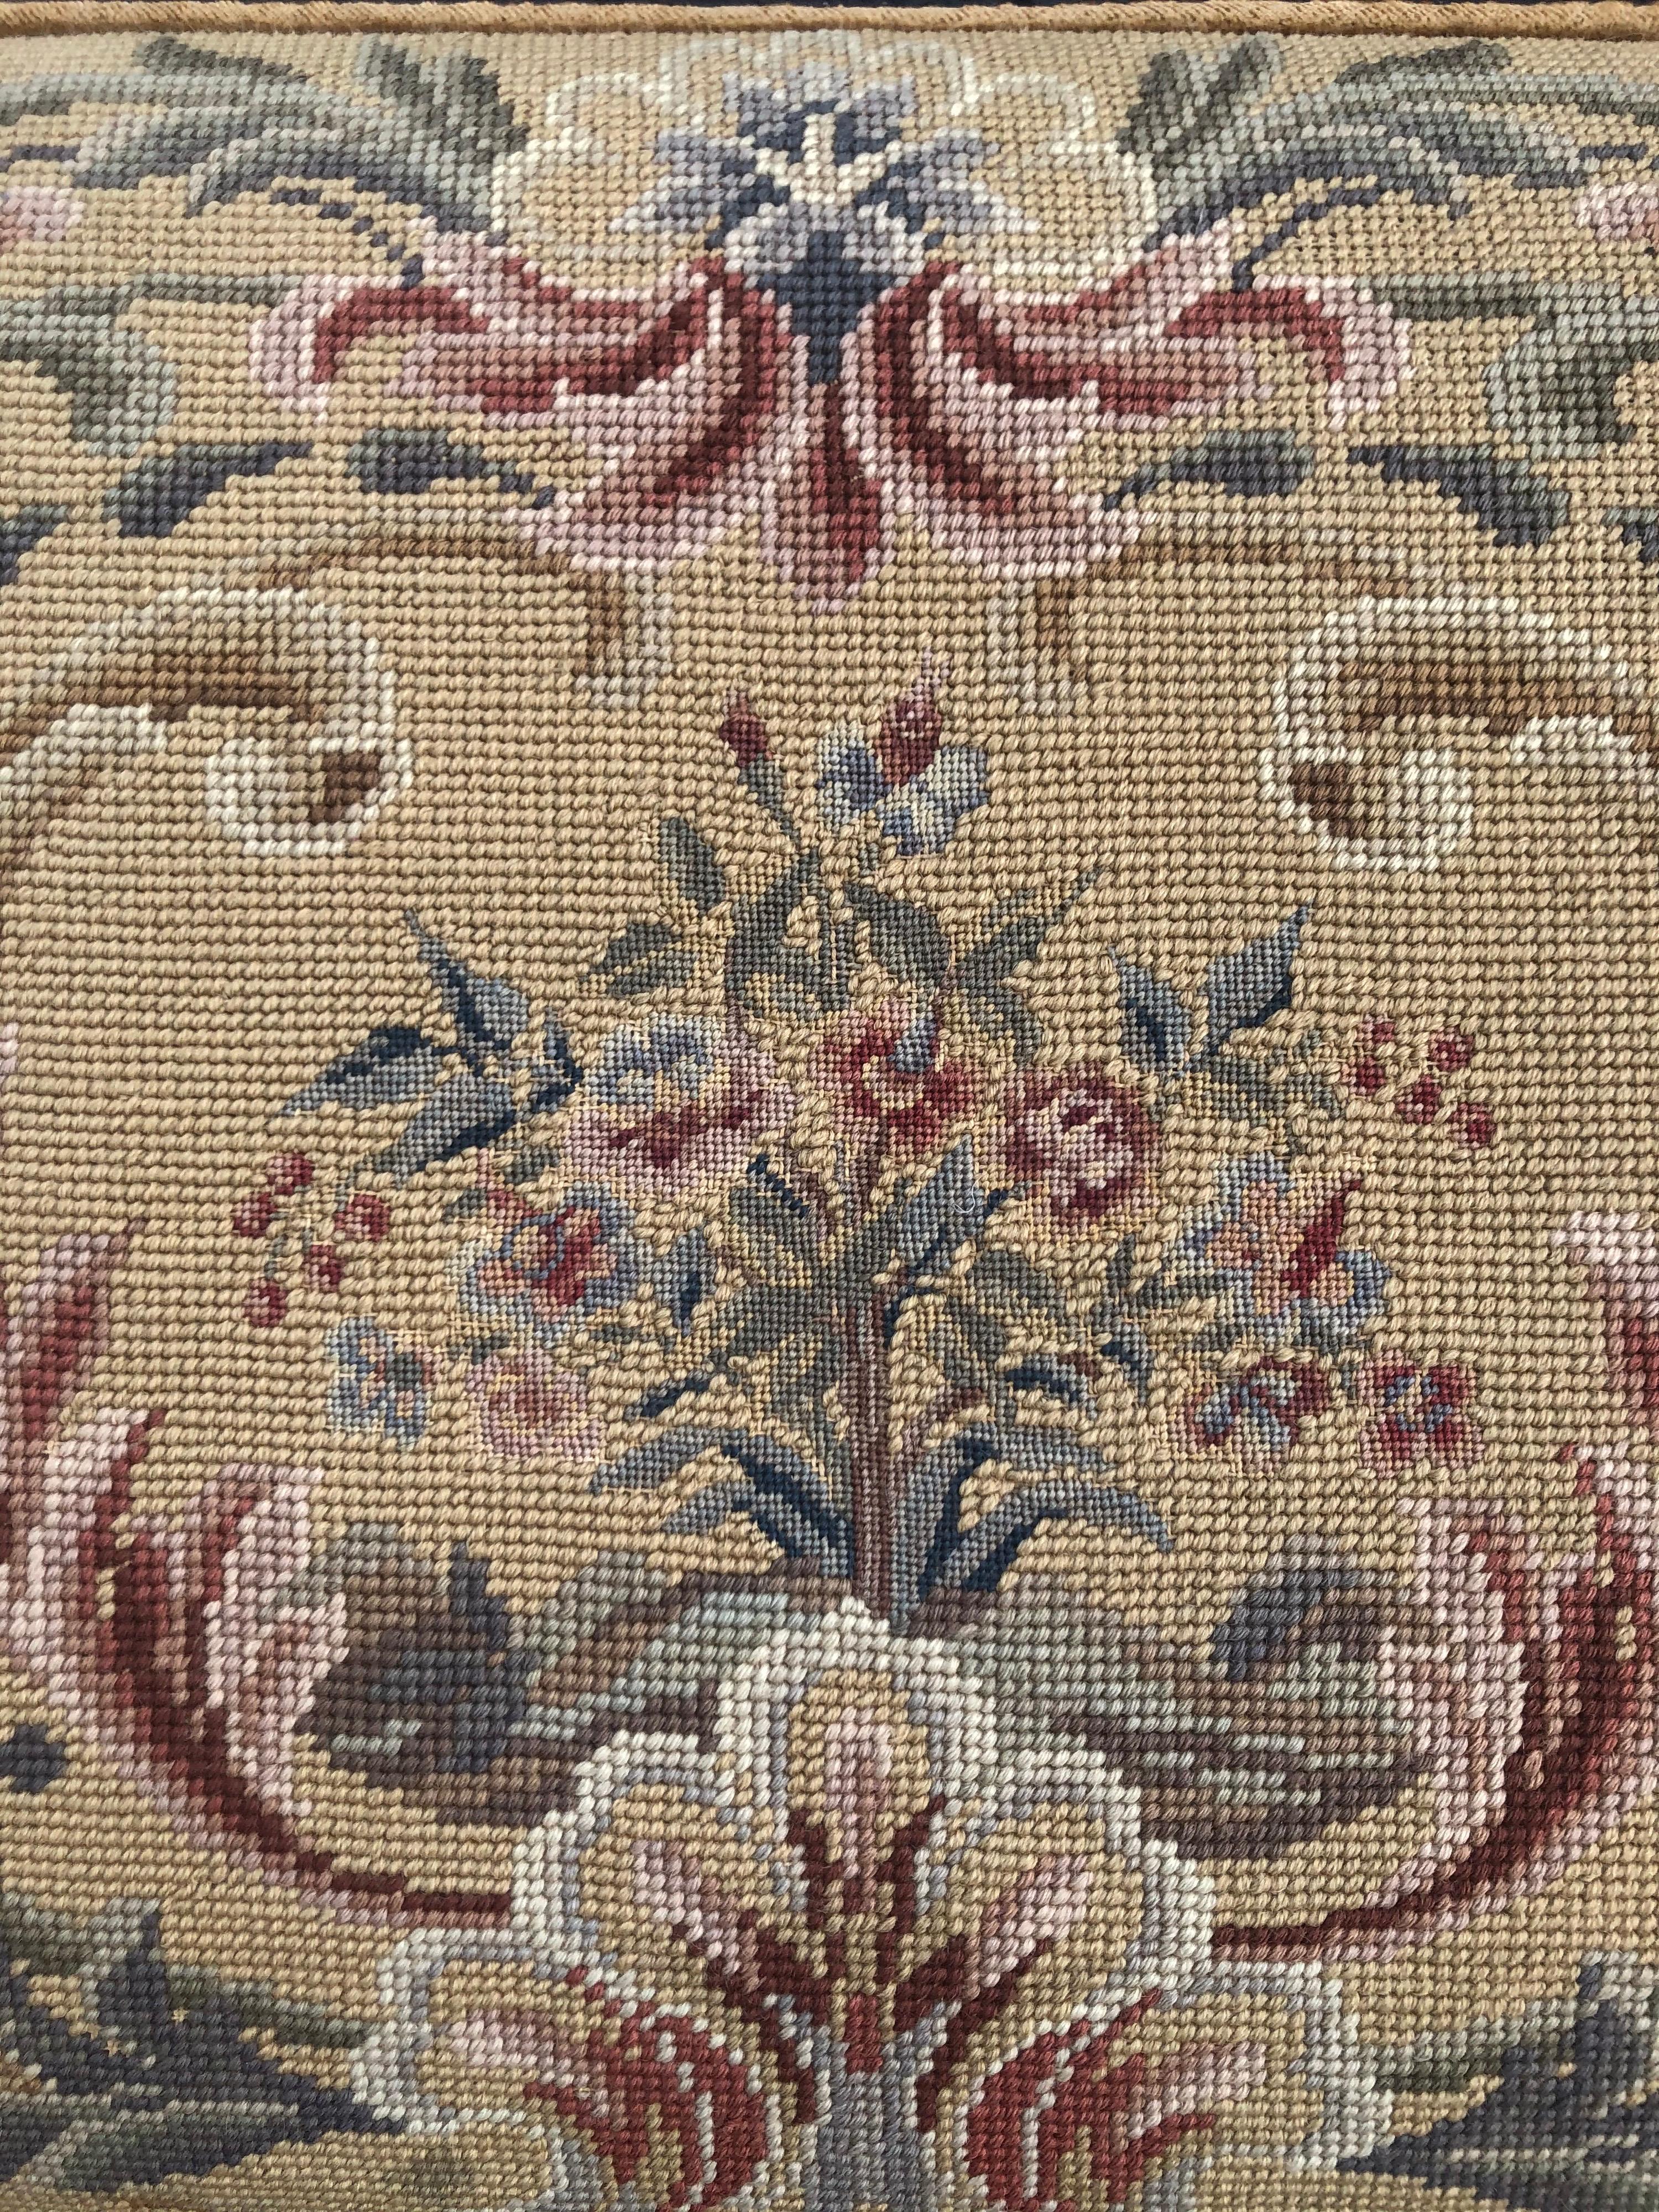 Mid-20th Century Vintage Needlepoint Upholstery Wall Hanging 